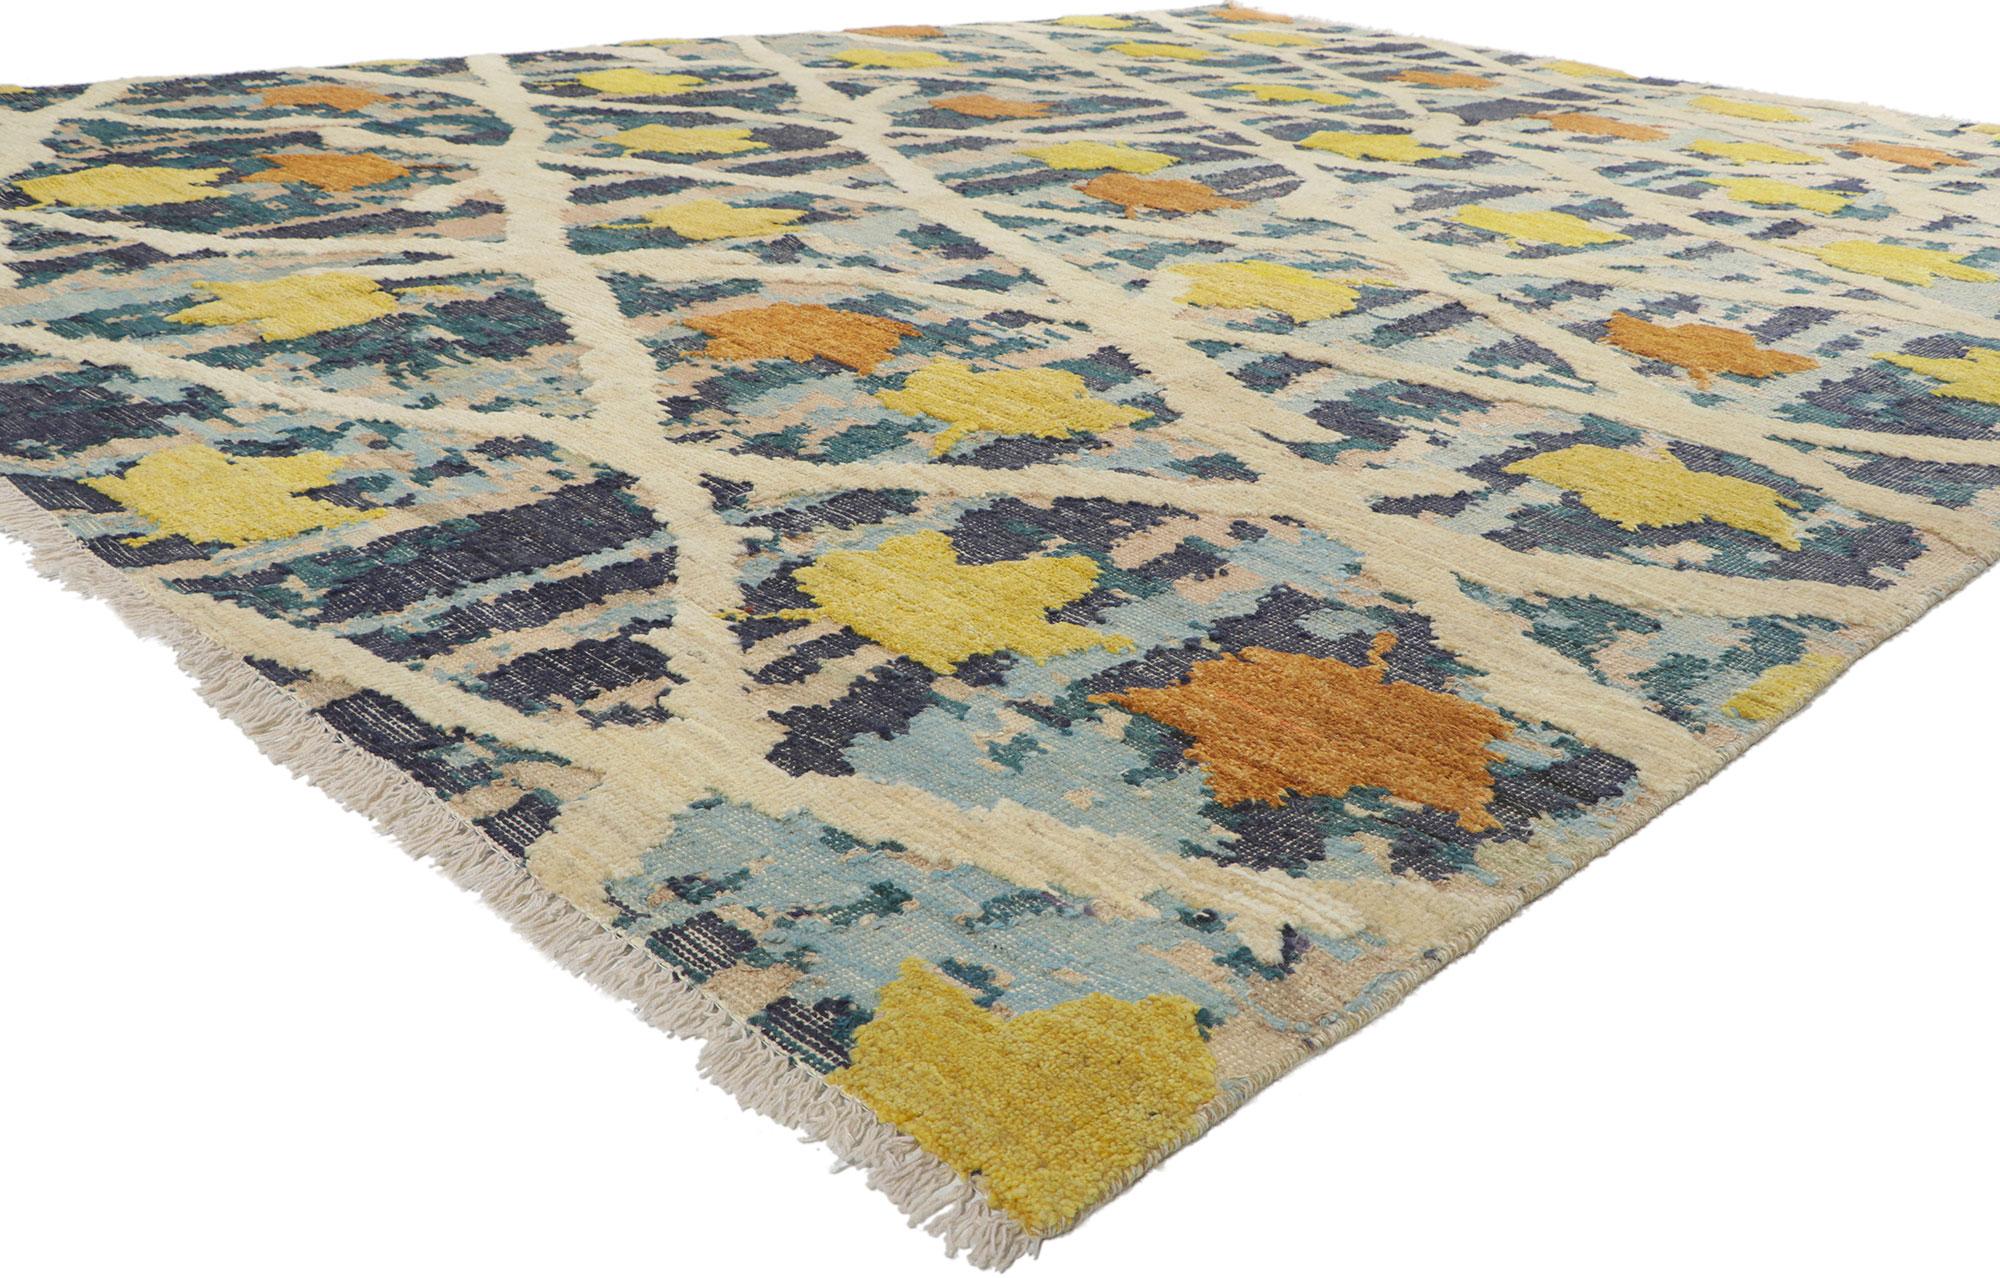 80398 New Abstract Moroccan High-Low Rug, 09’11 x 13’04. Emanating autumn in the Italian Alps with incredible detail and texture, this textured high low rug is a captivating vision of woven beauty. The eye-catching Biophilic Design and modern